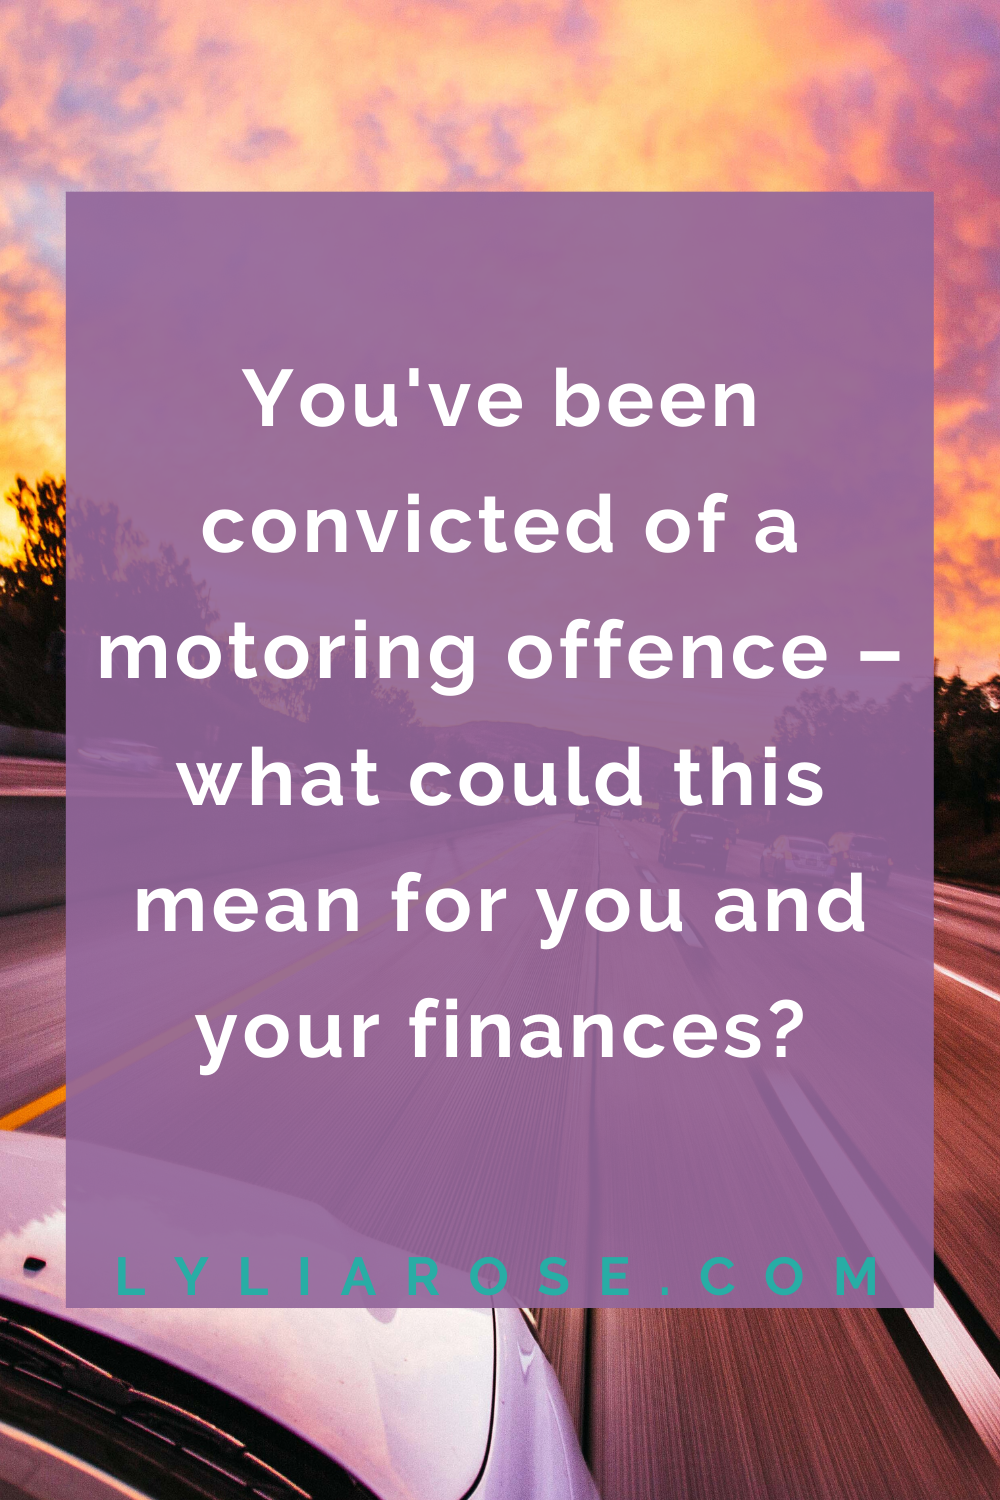 So, youve been convicted of a motoring offence &ndash; what could this mean for